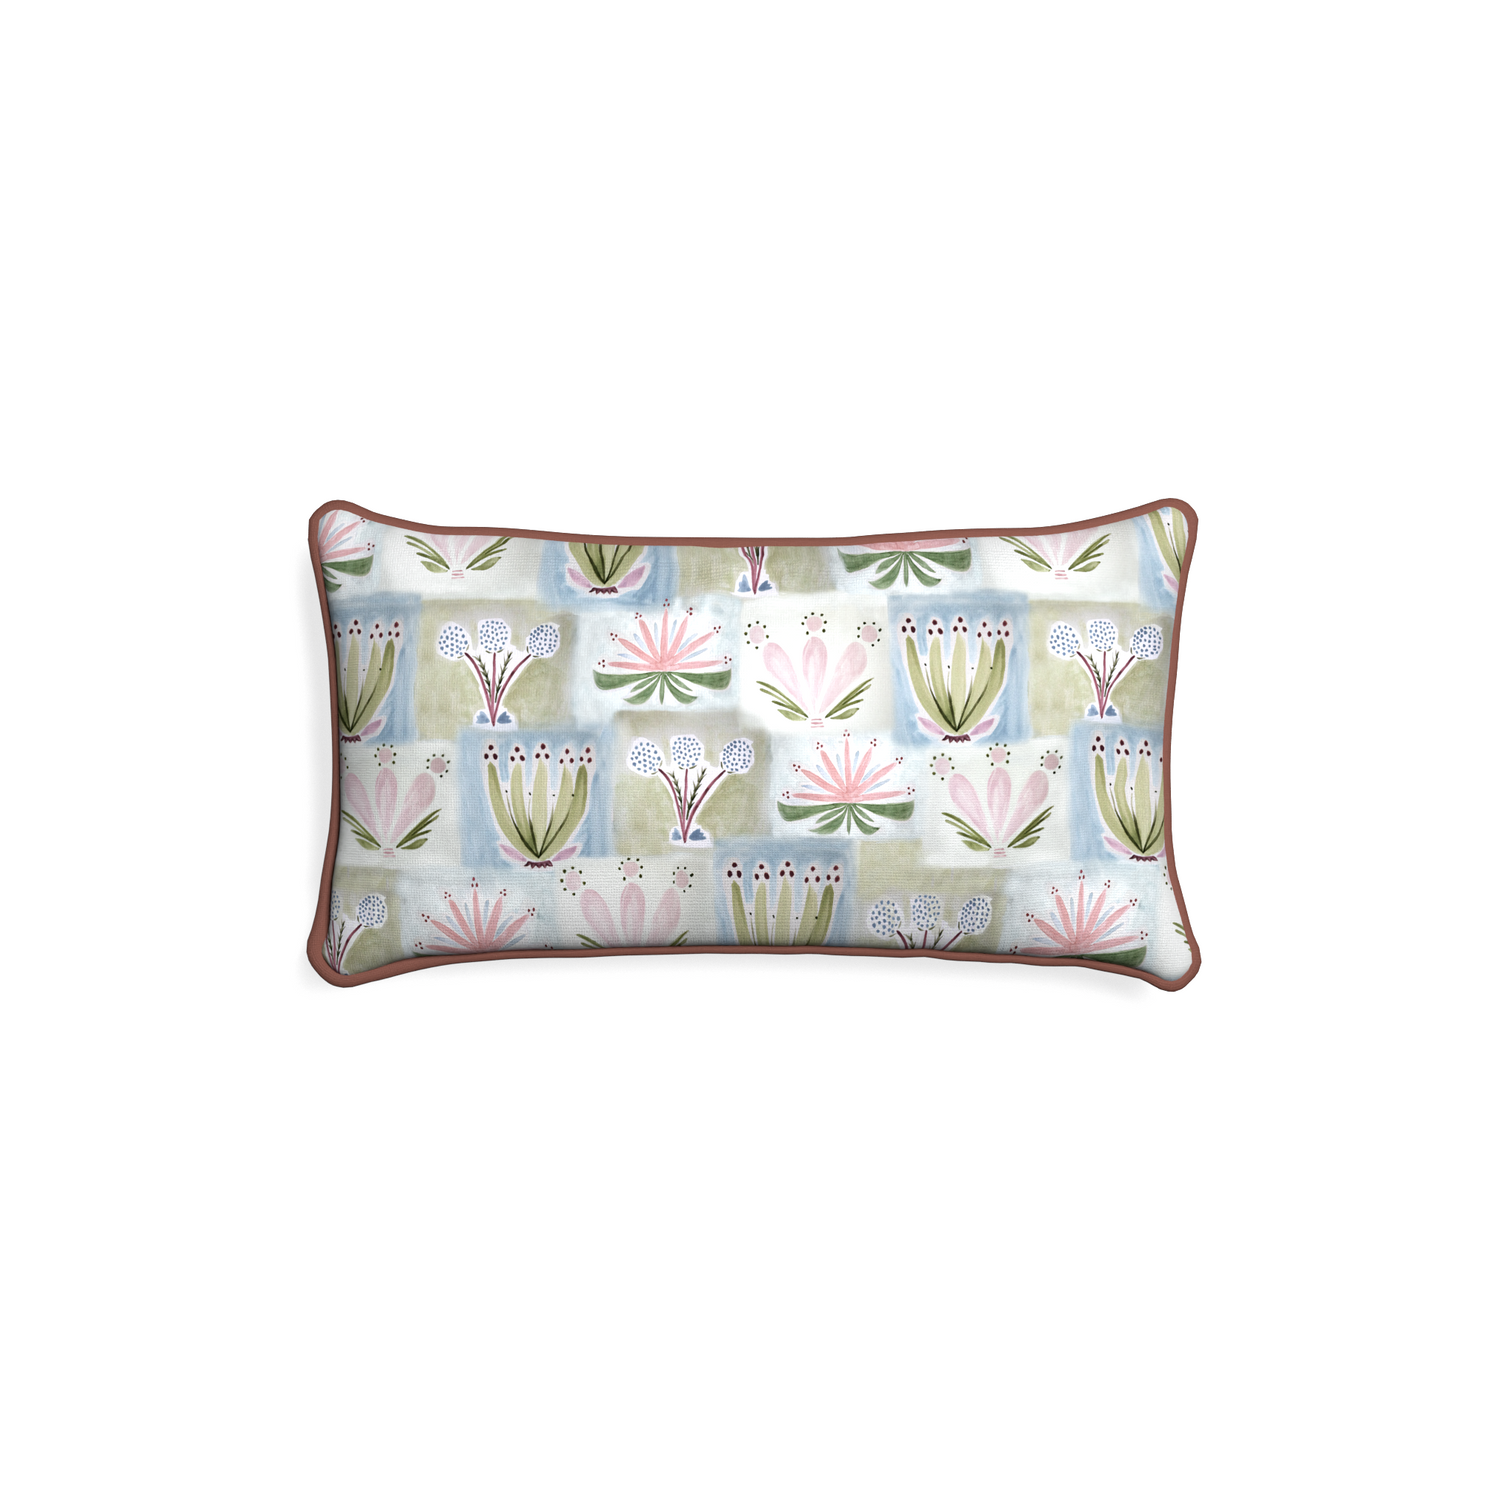 Petite-lumbar harper custom hand-painted floralpillow with w piping on white background